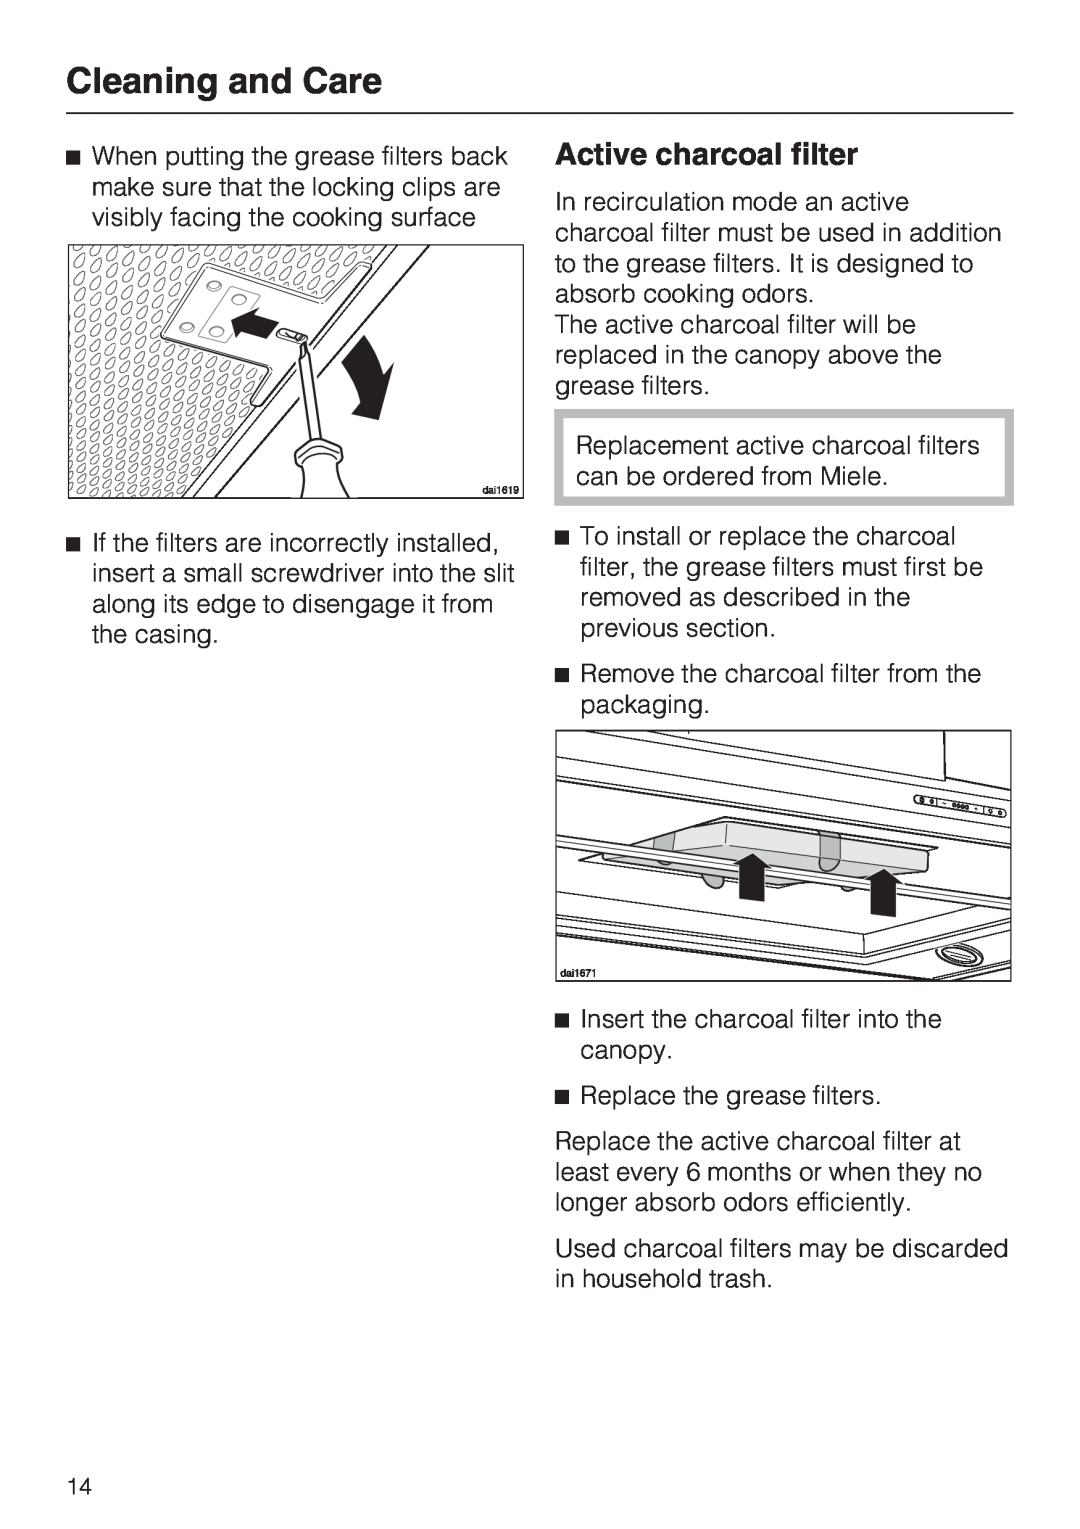 Miele DA 390-5 installation instructions Active charcoal filter, Cleaning and Care 